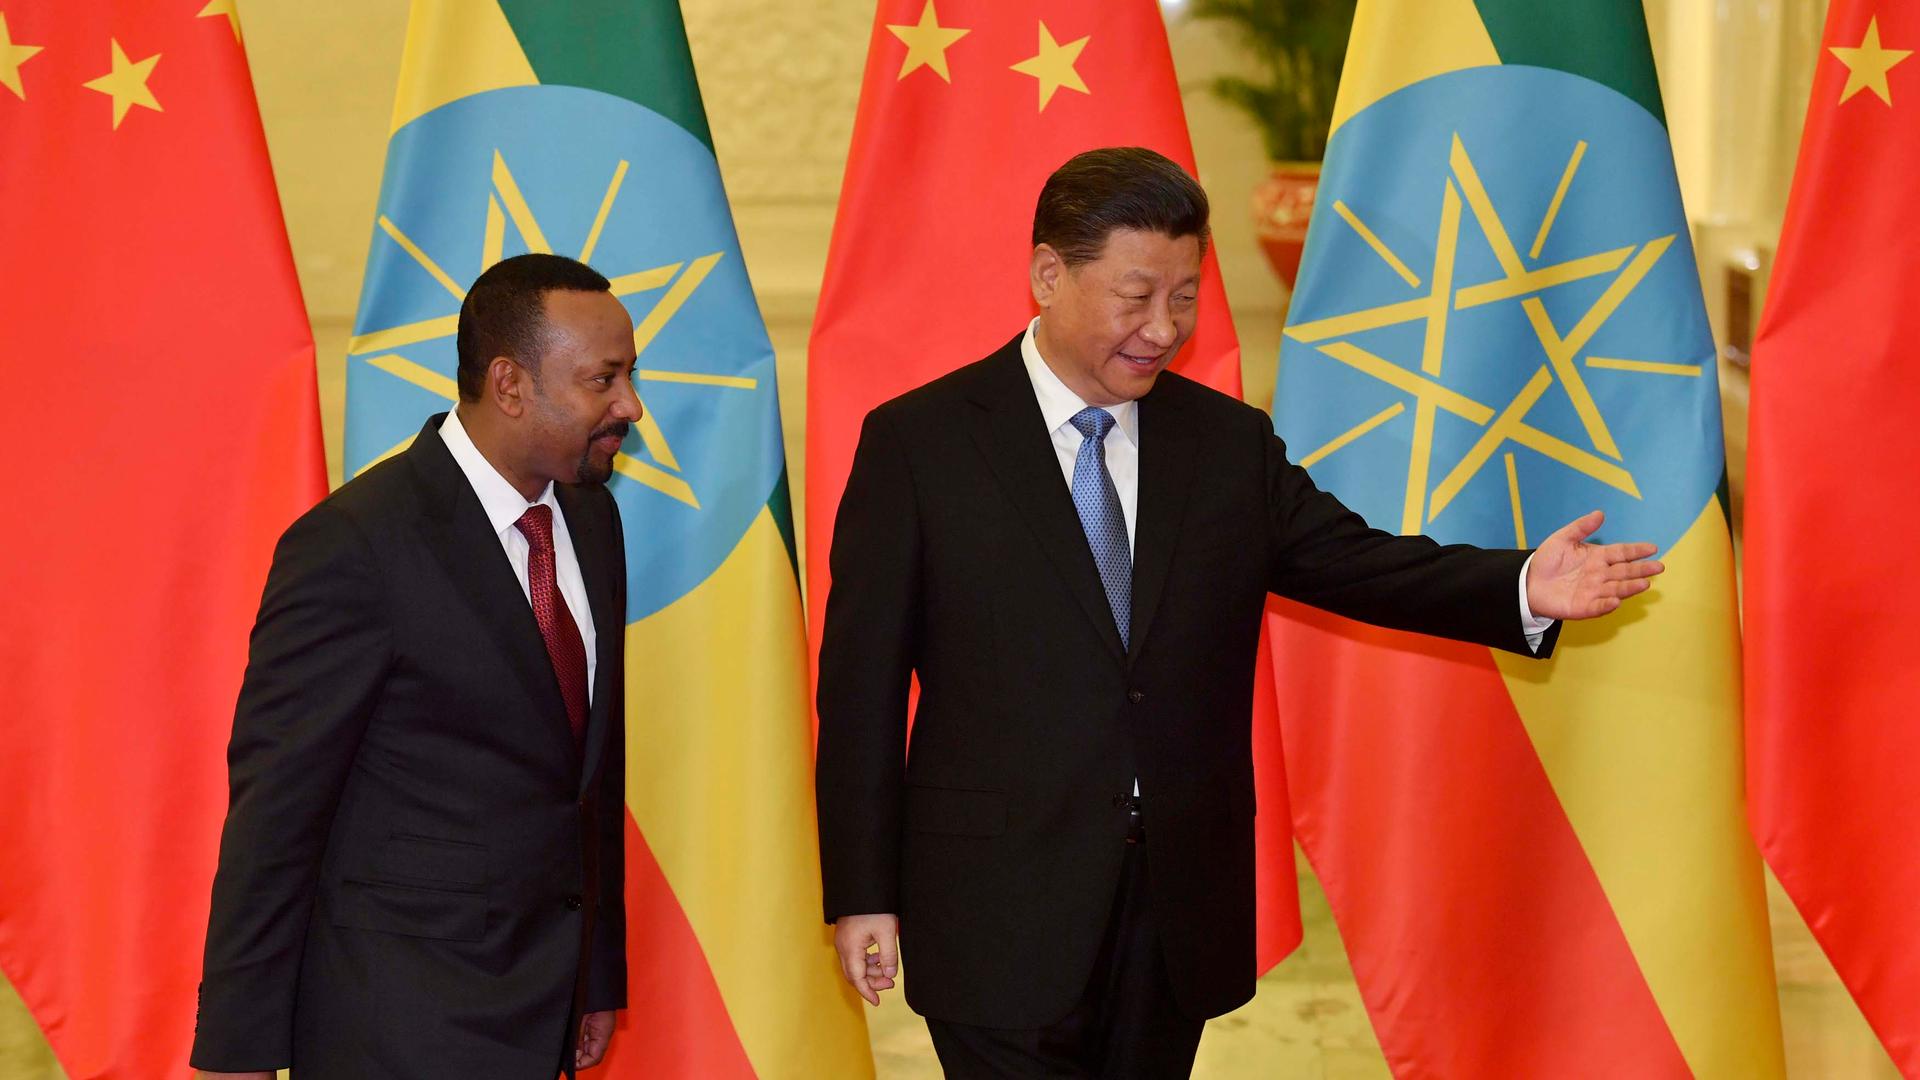 Ethiopia's Prime Minister Abiy Ahmed, left, is shown the way by Chinese President Xi Jinping before their meeting at the Great Hall of the People in Beijing,China, April 24, 2019.